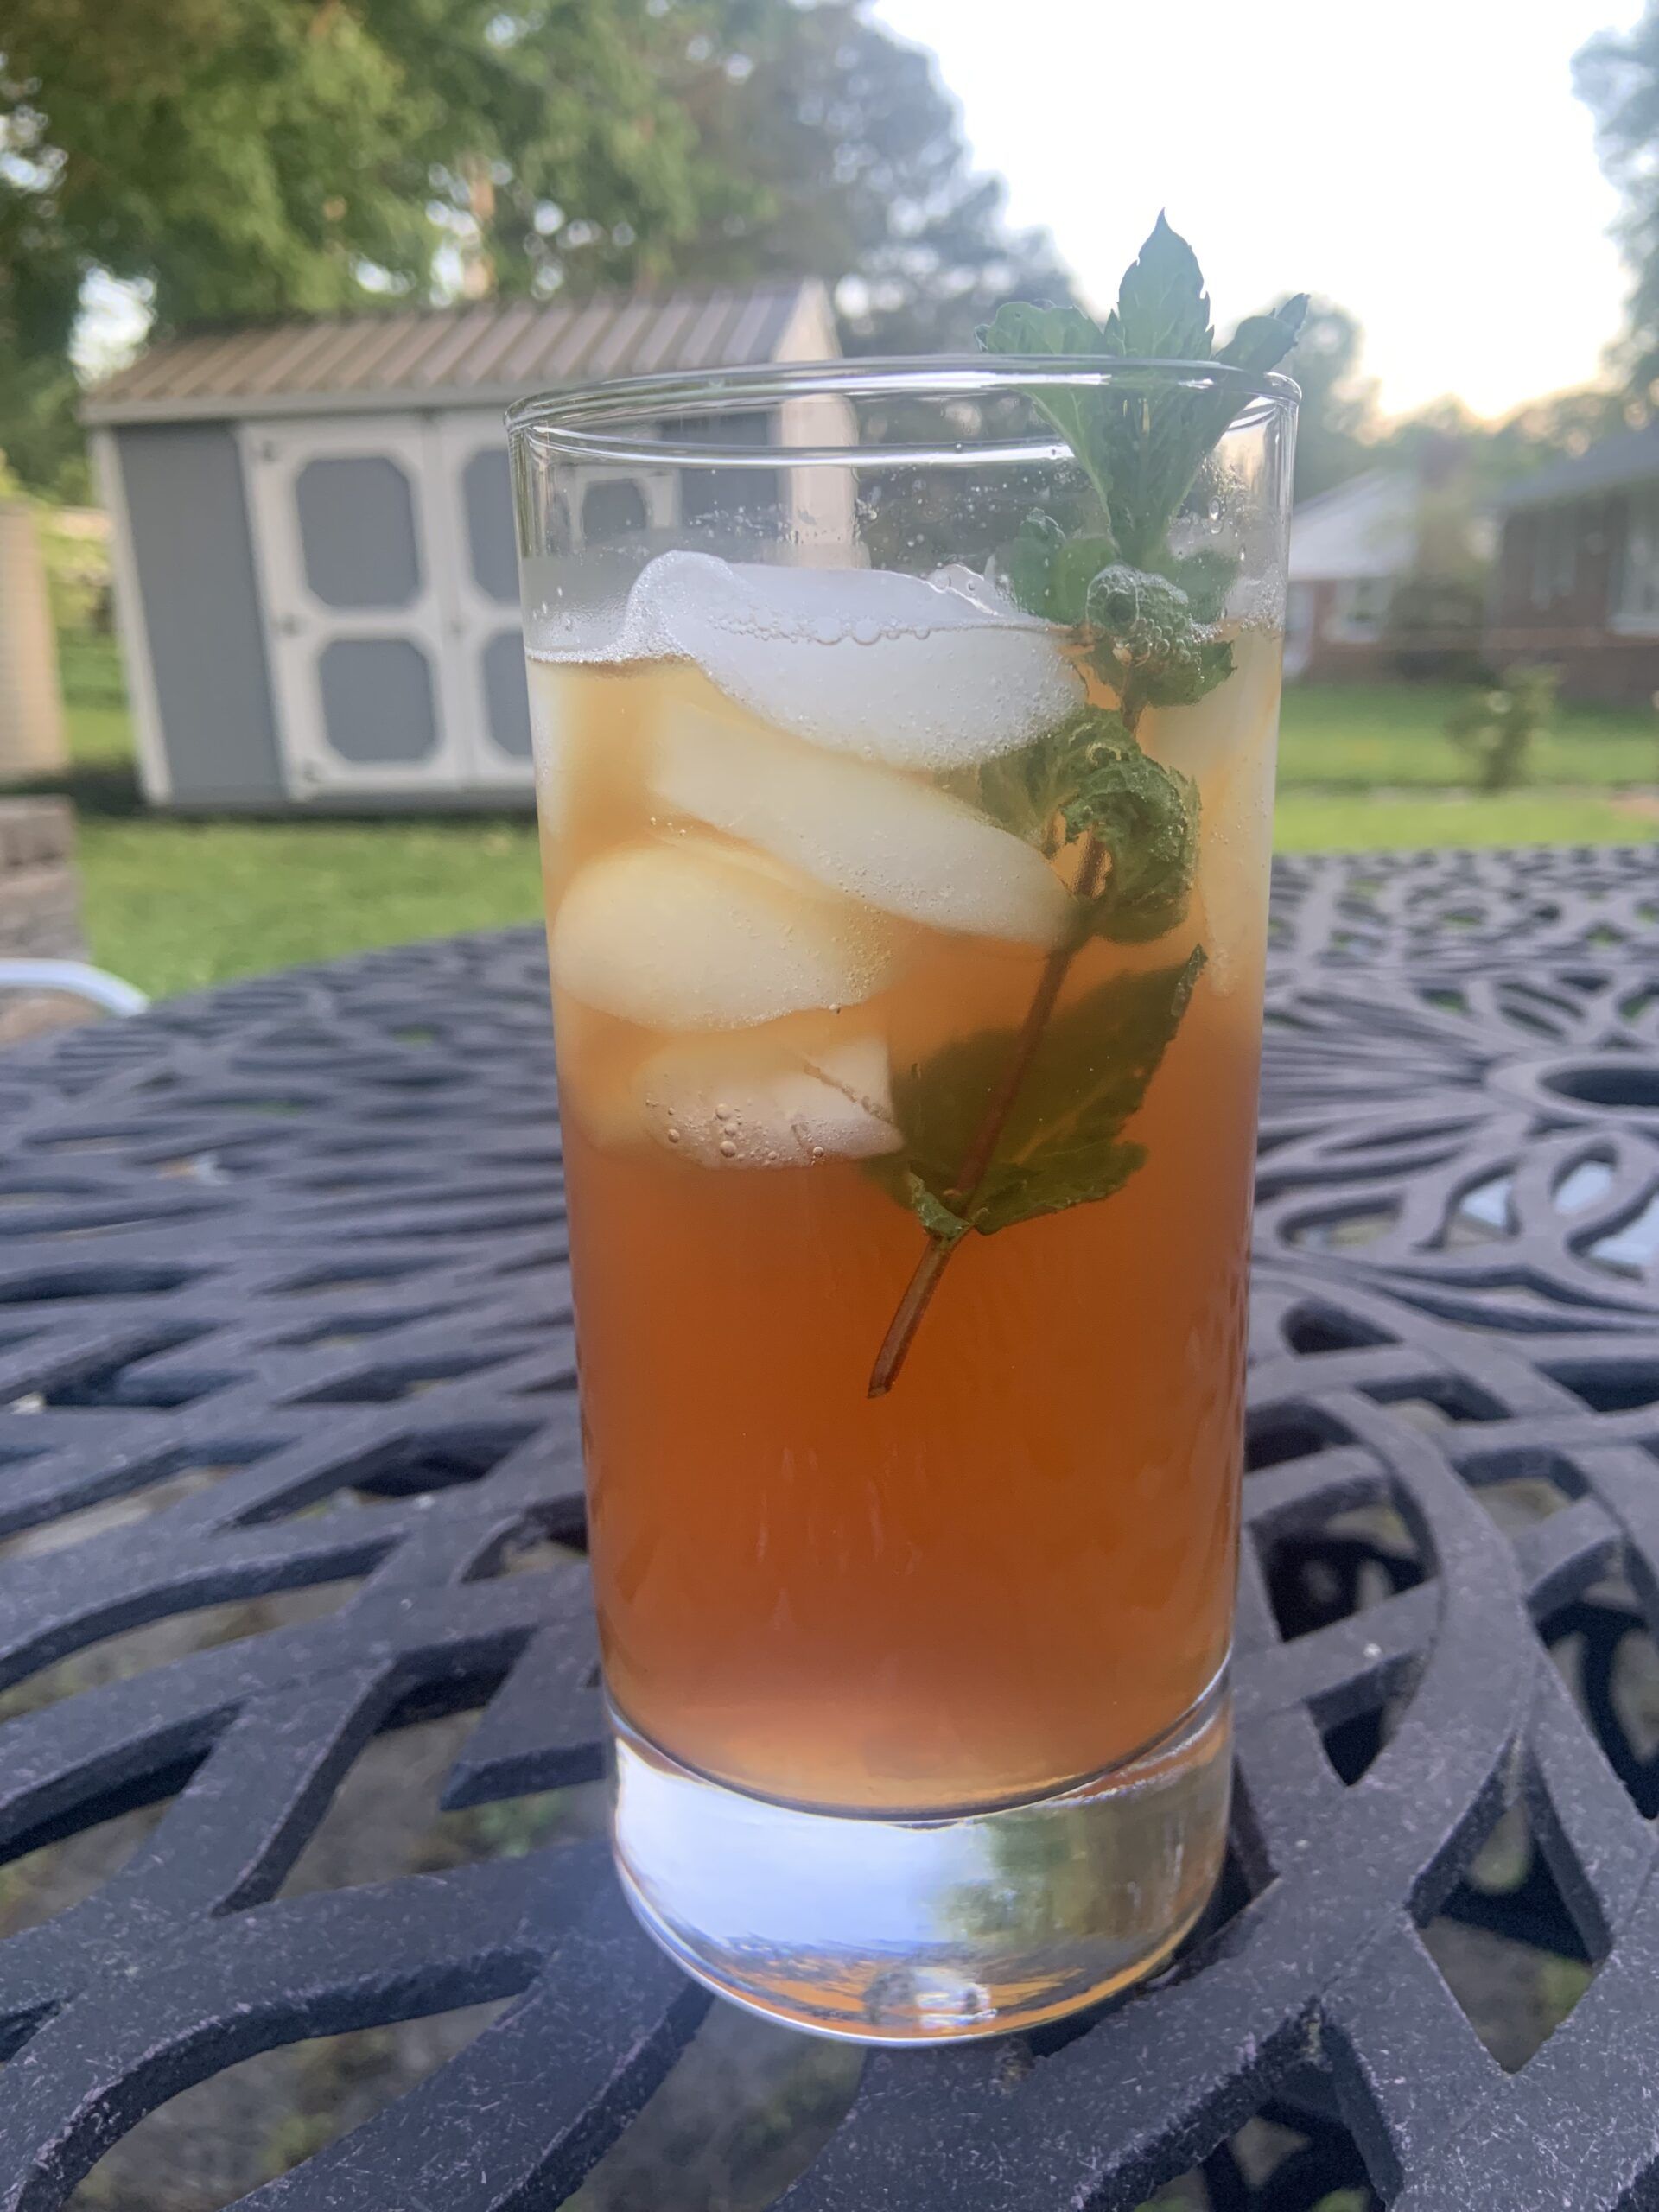 a photo of a glass of iced tea with a mint sprig